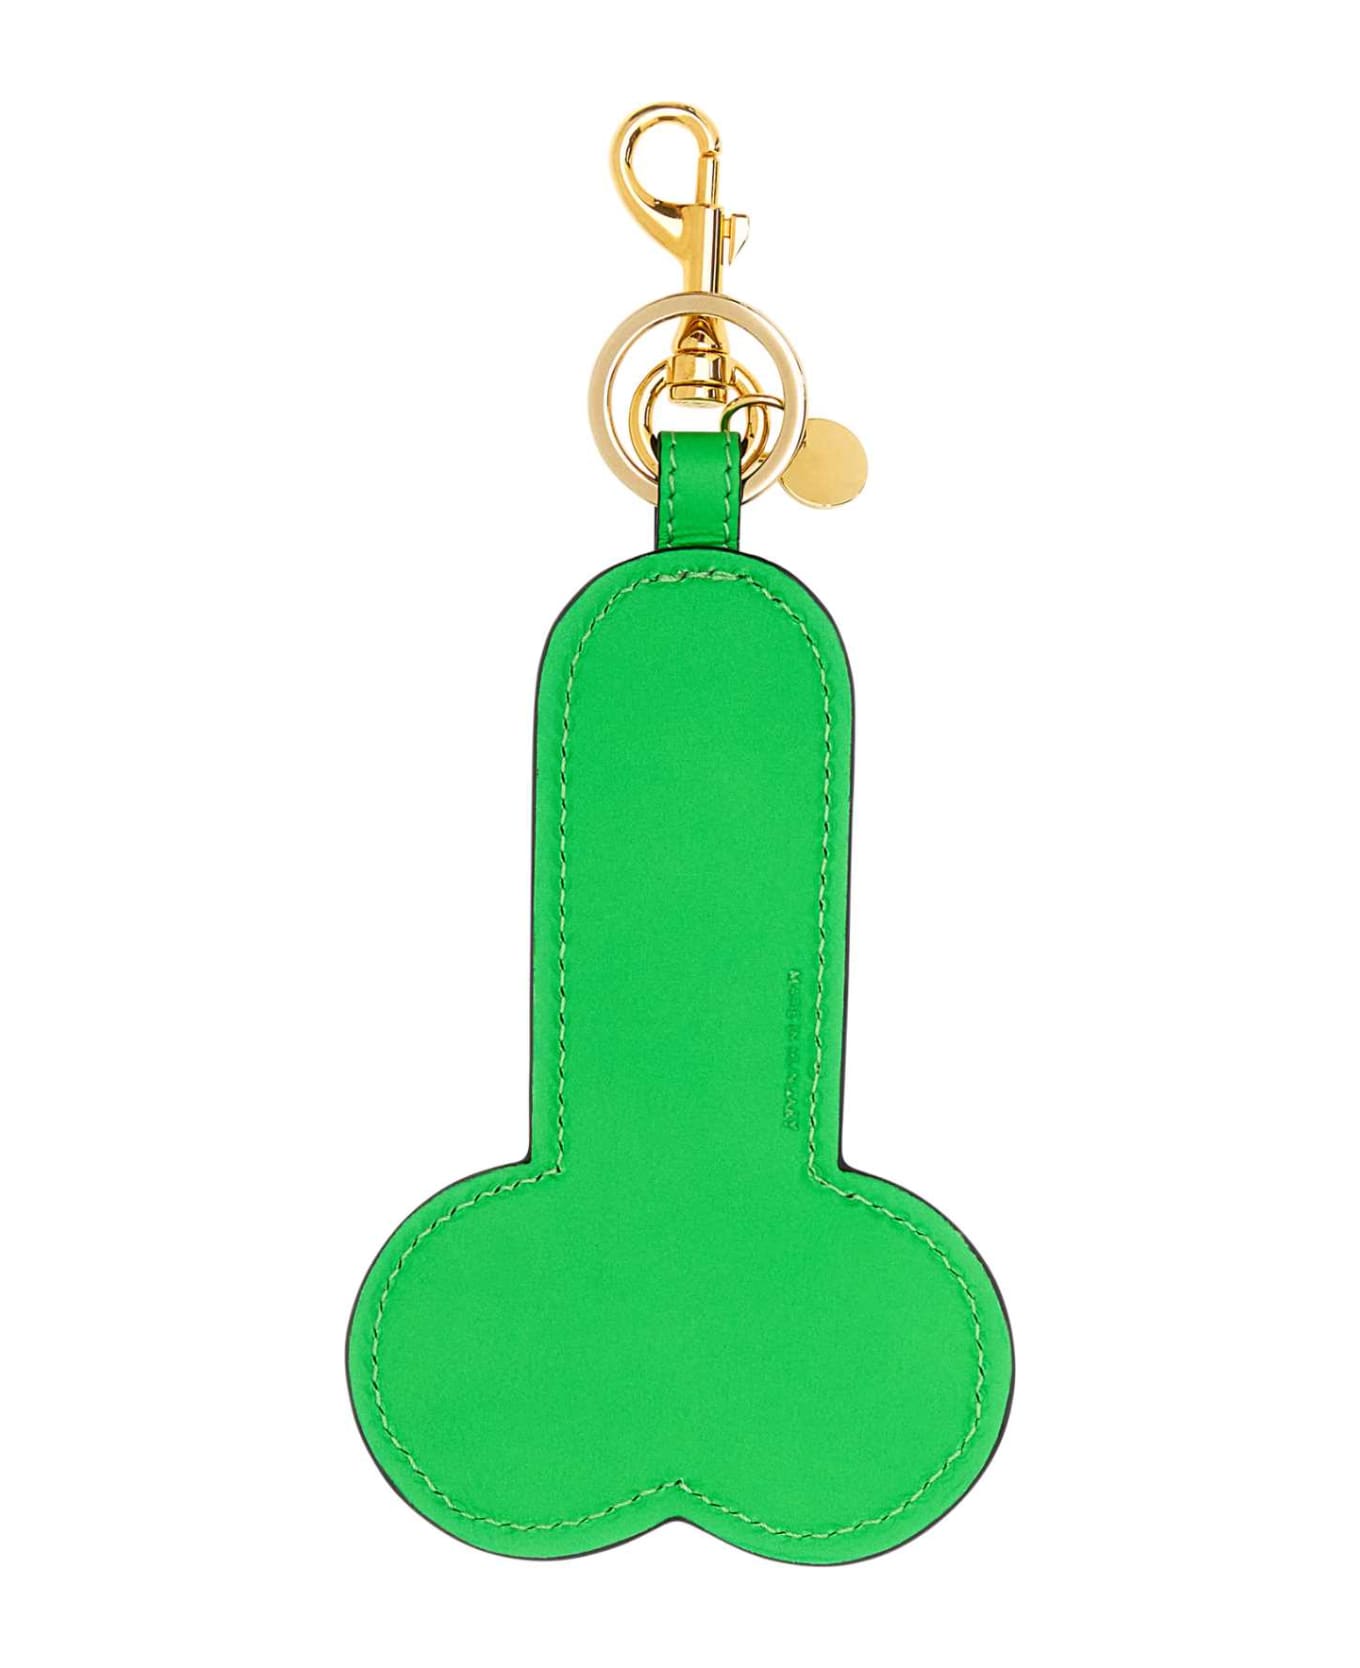 J.W. Anderson Fluo Green Leather Key Ring - NEONGREEN